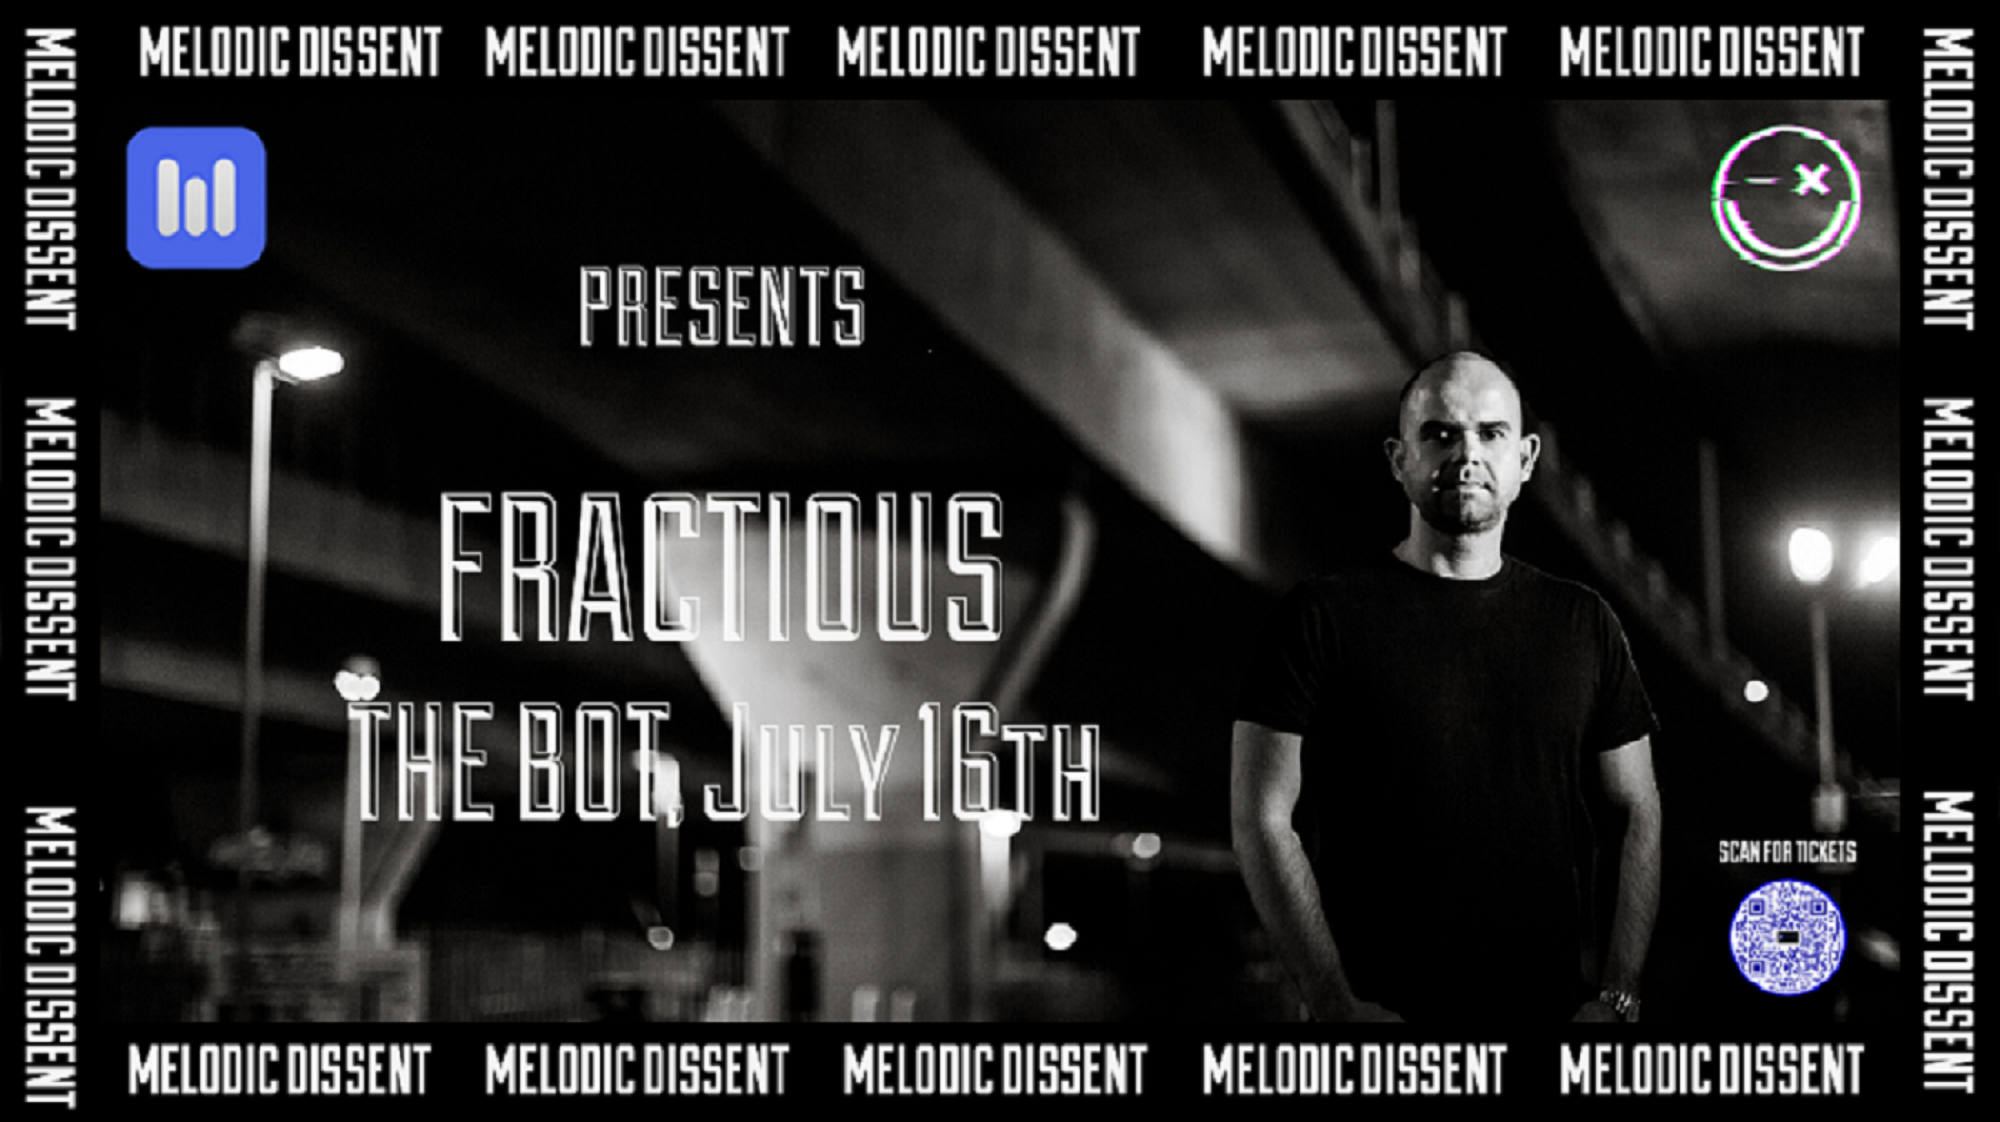 MELODIC DISSENT present Fractious - フライヤー表